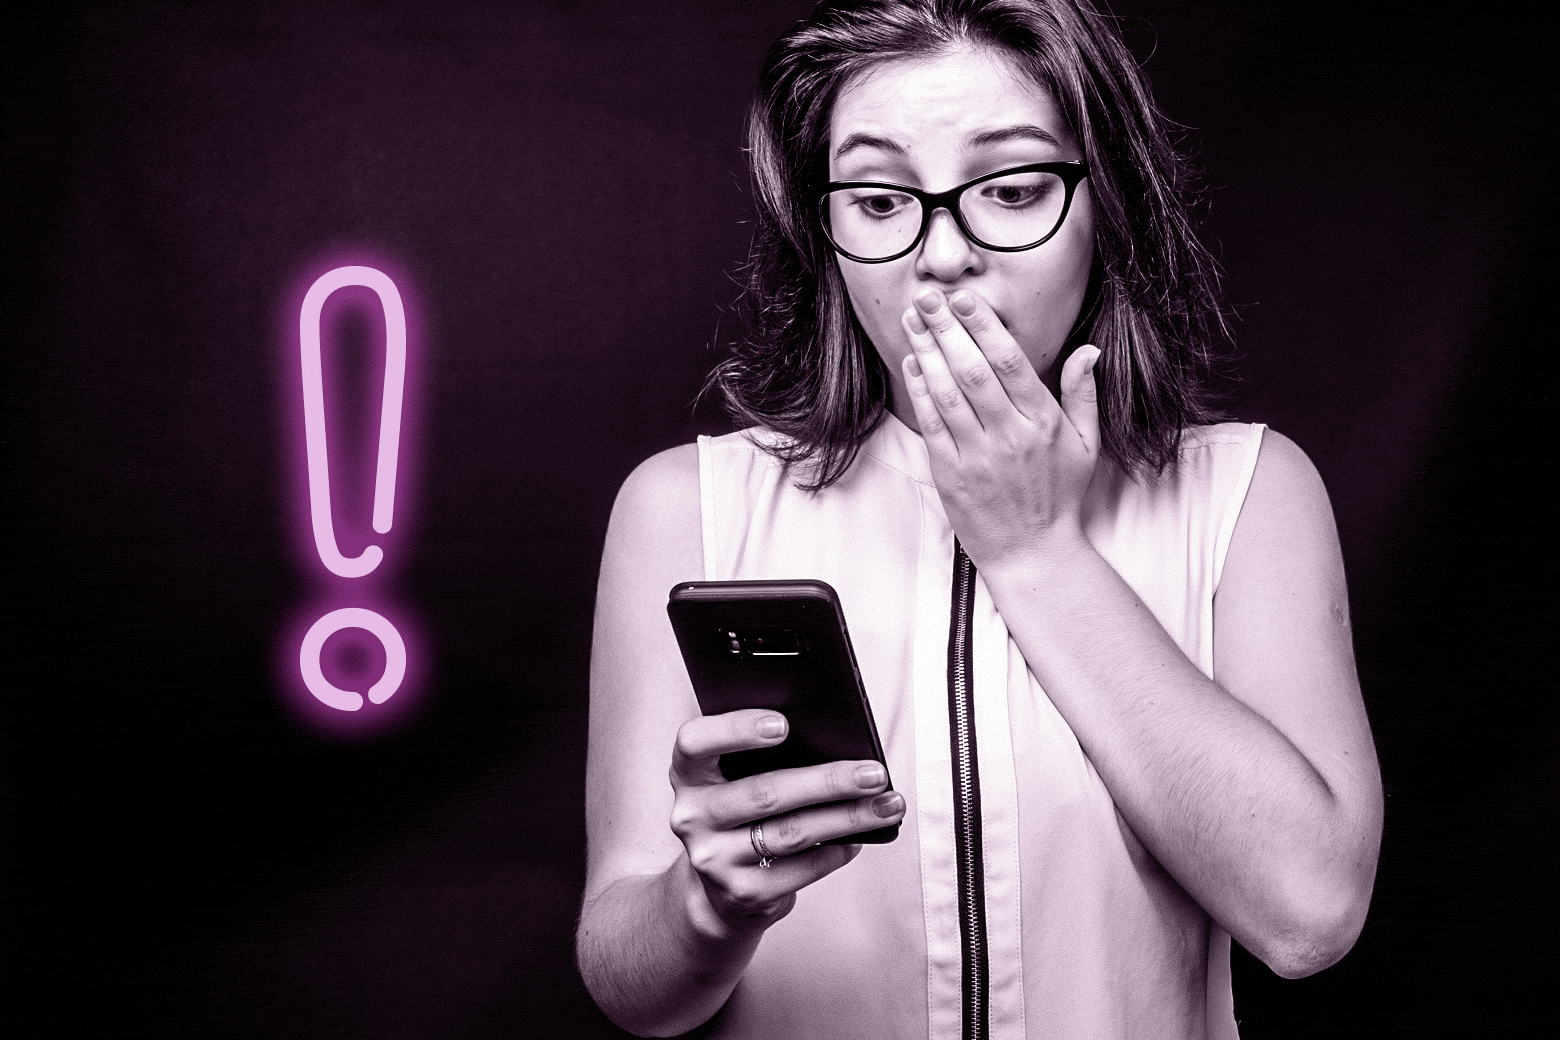 A woman looks shocked at her phone.